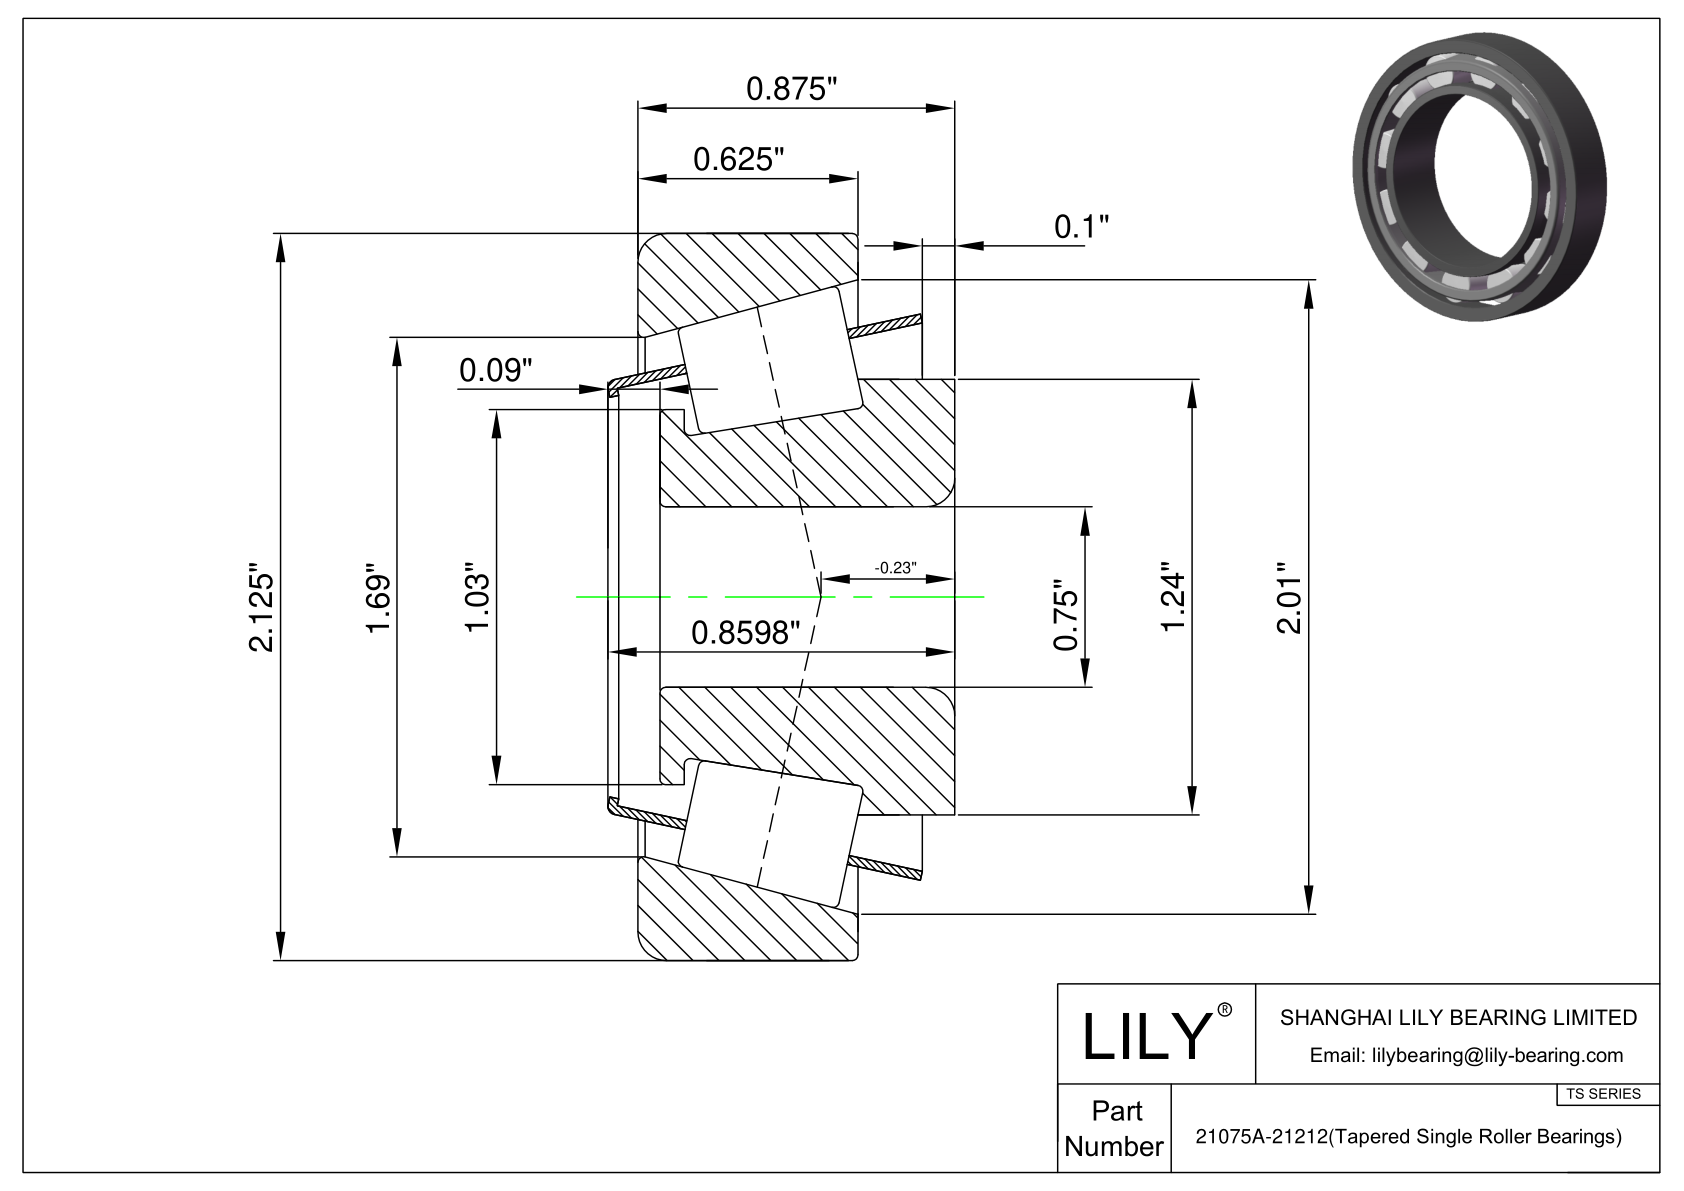 21075A-21212 TS (Tapered Single Roller Bearings) (Imperial) cad drawing